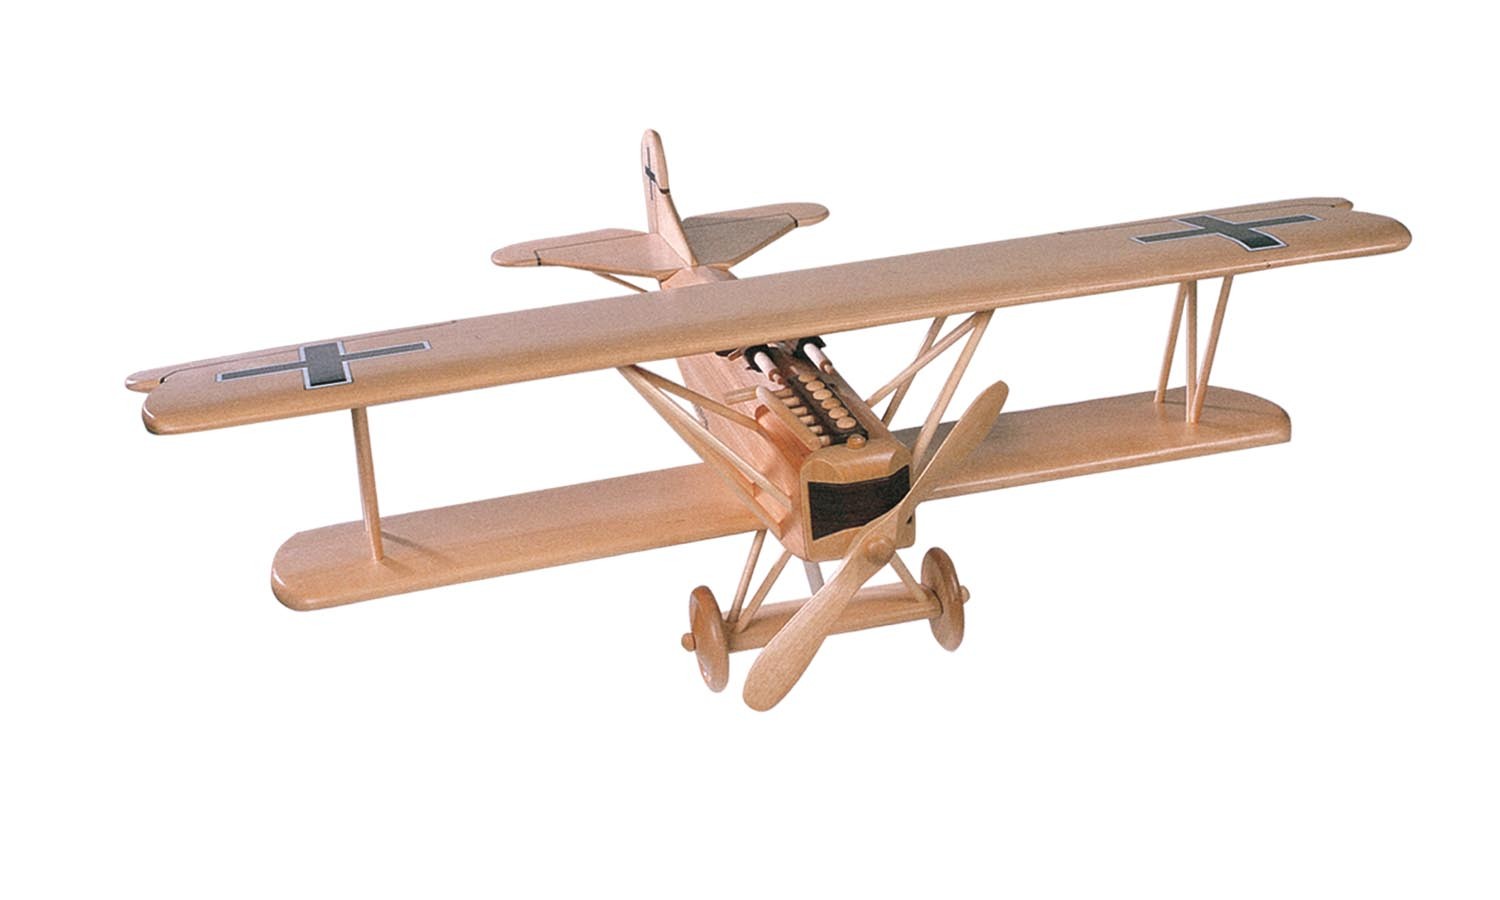 Wooden Toy Fokker D.VII Airplane